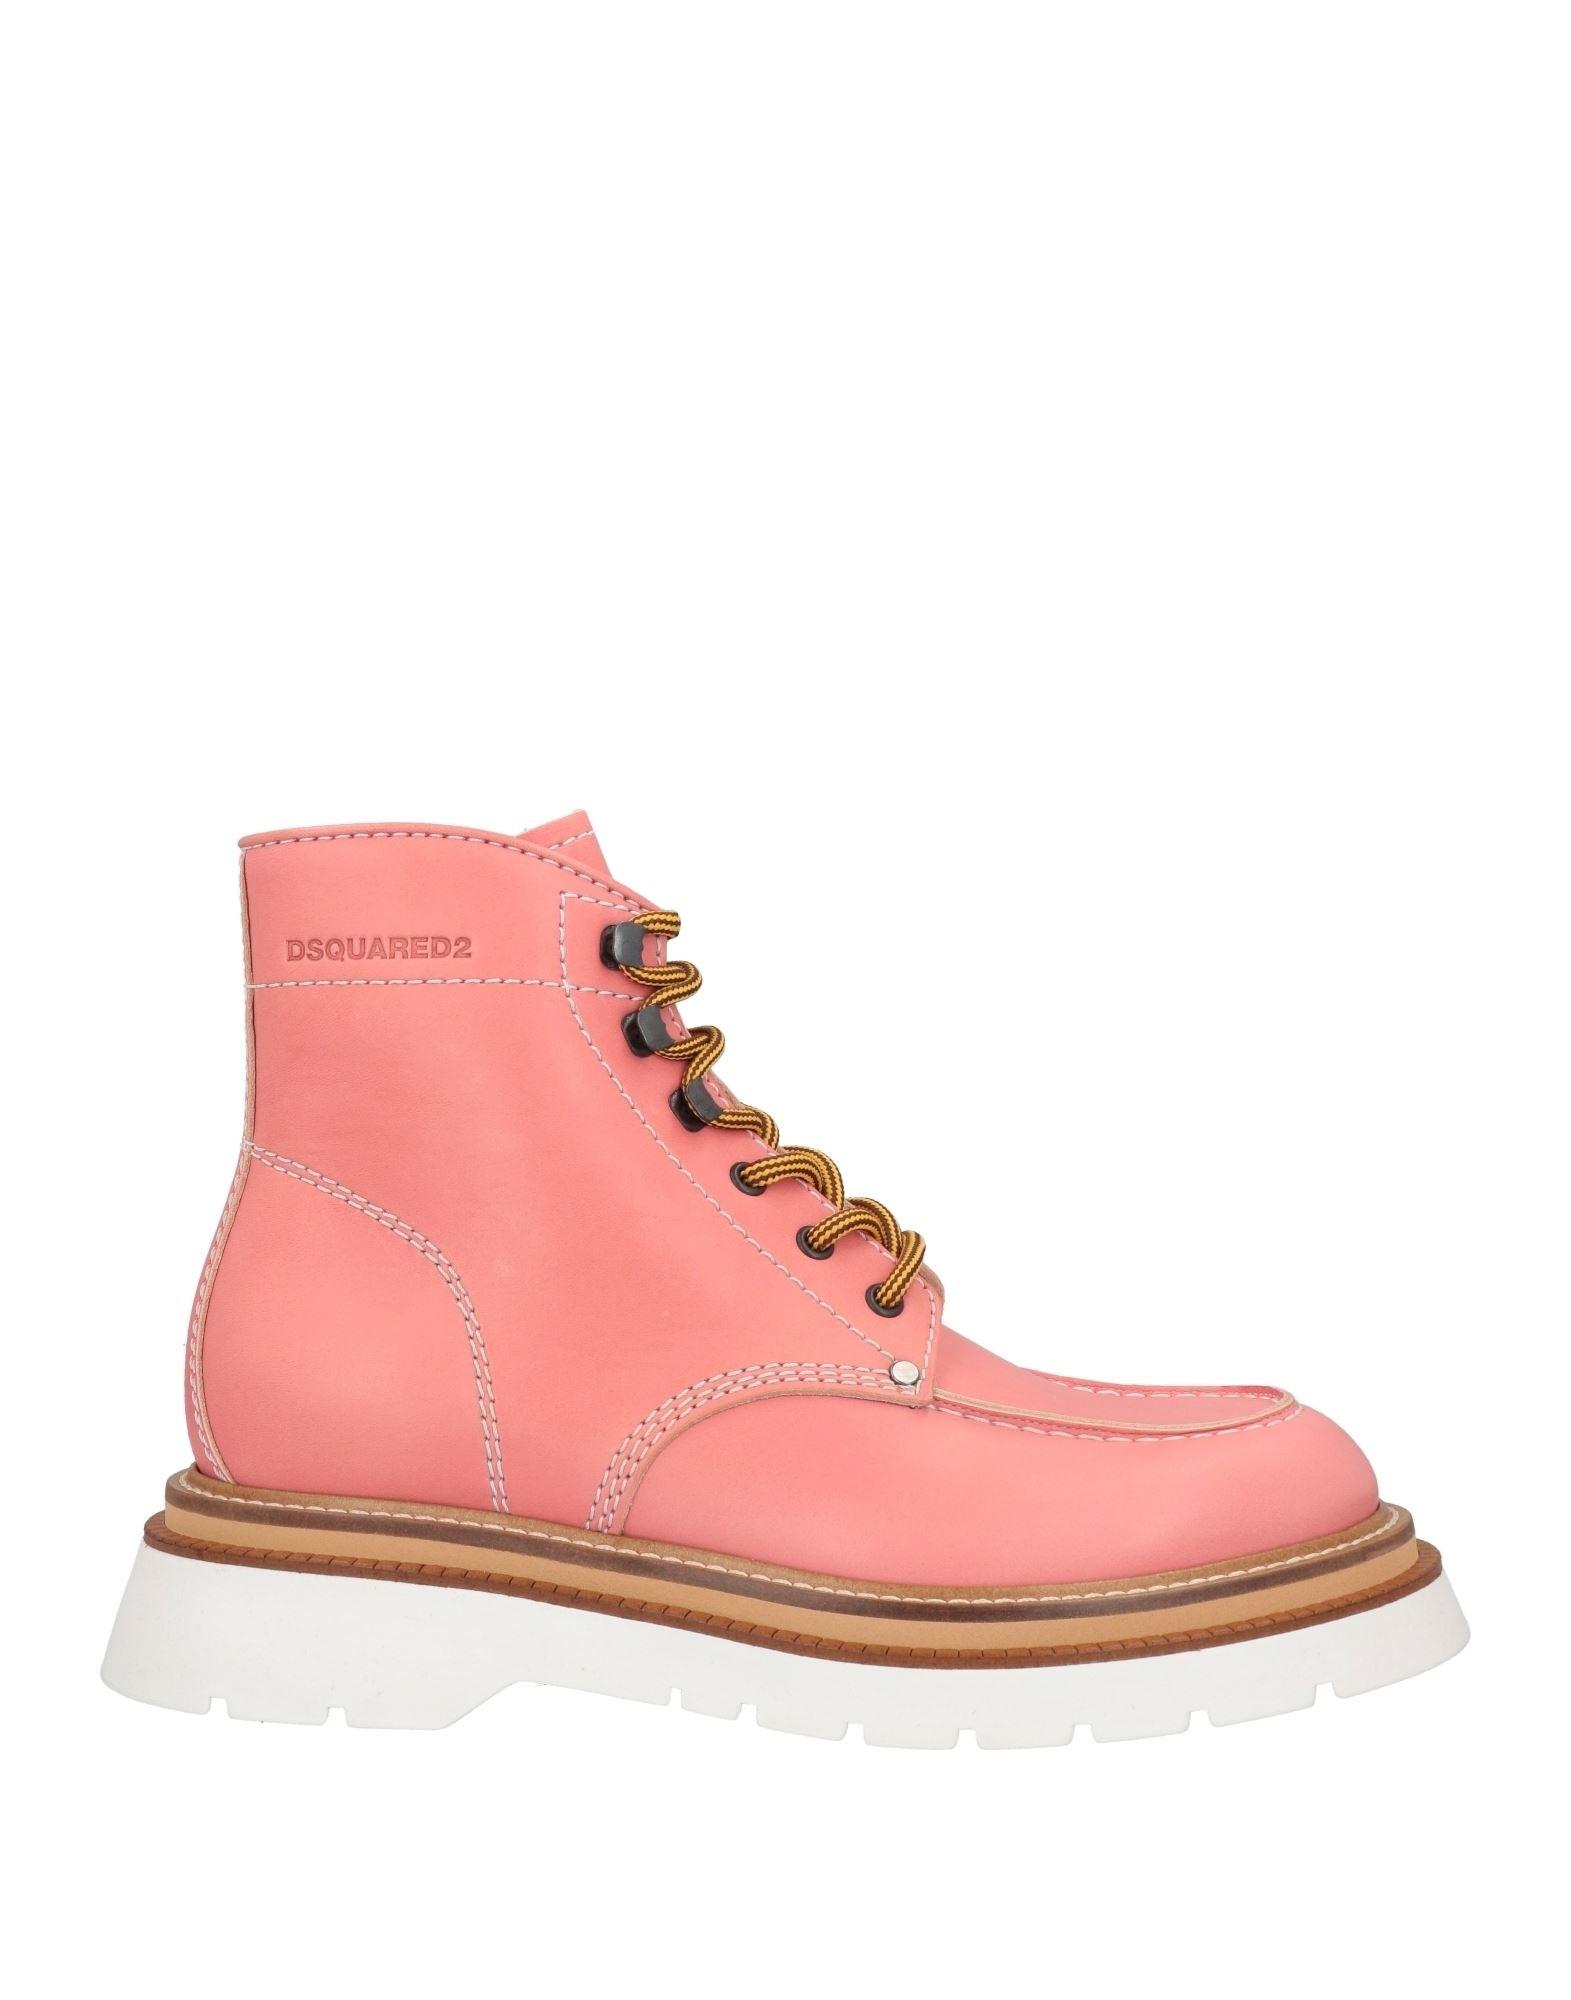 DSquared² Ankle Boots in Pink for Men | Lyst